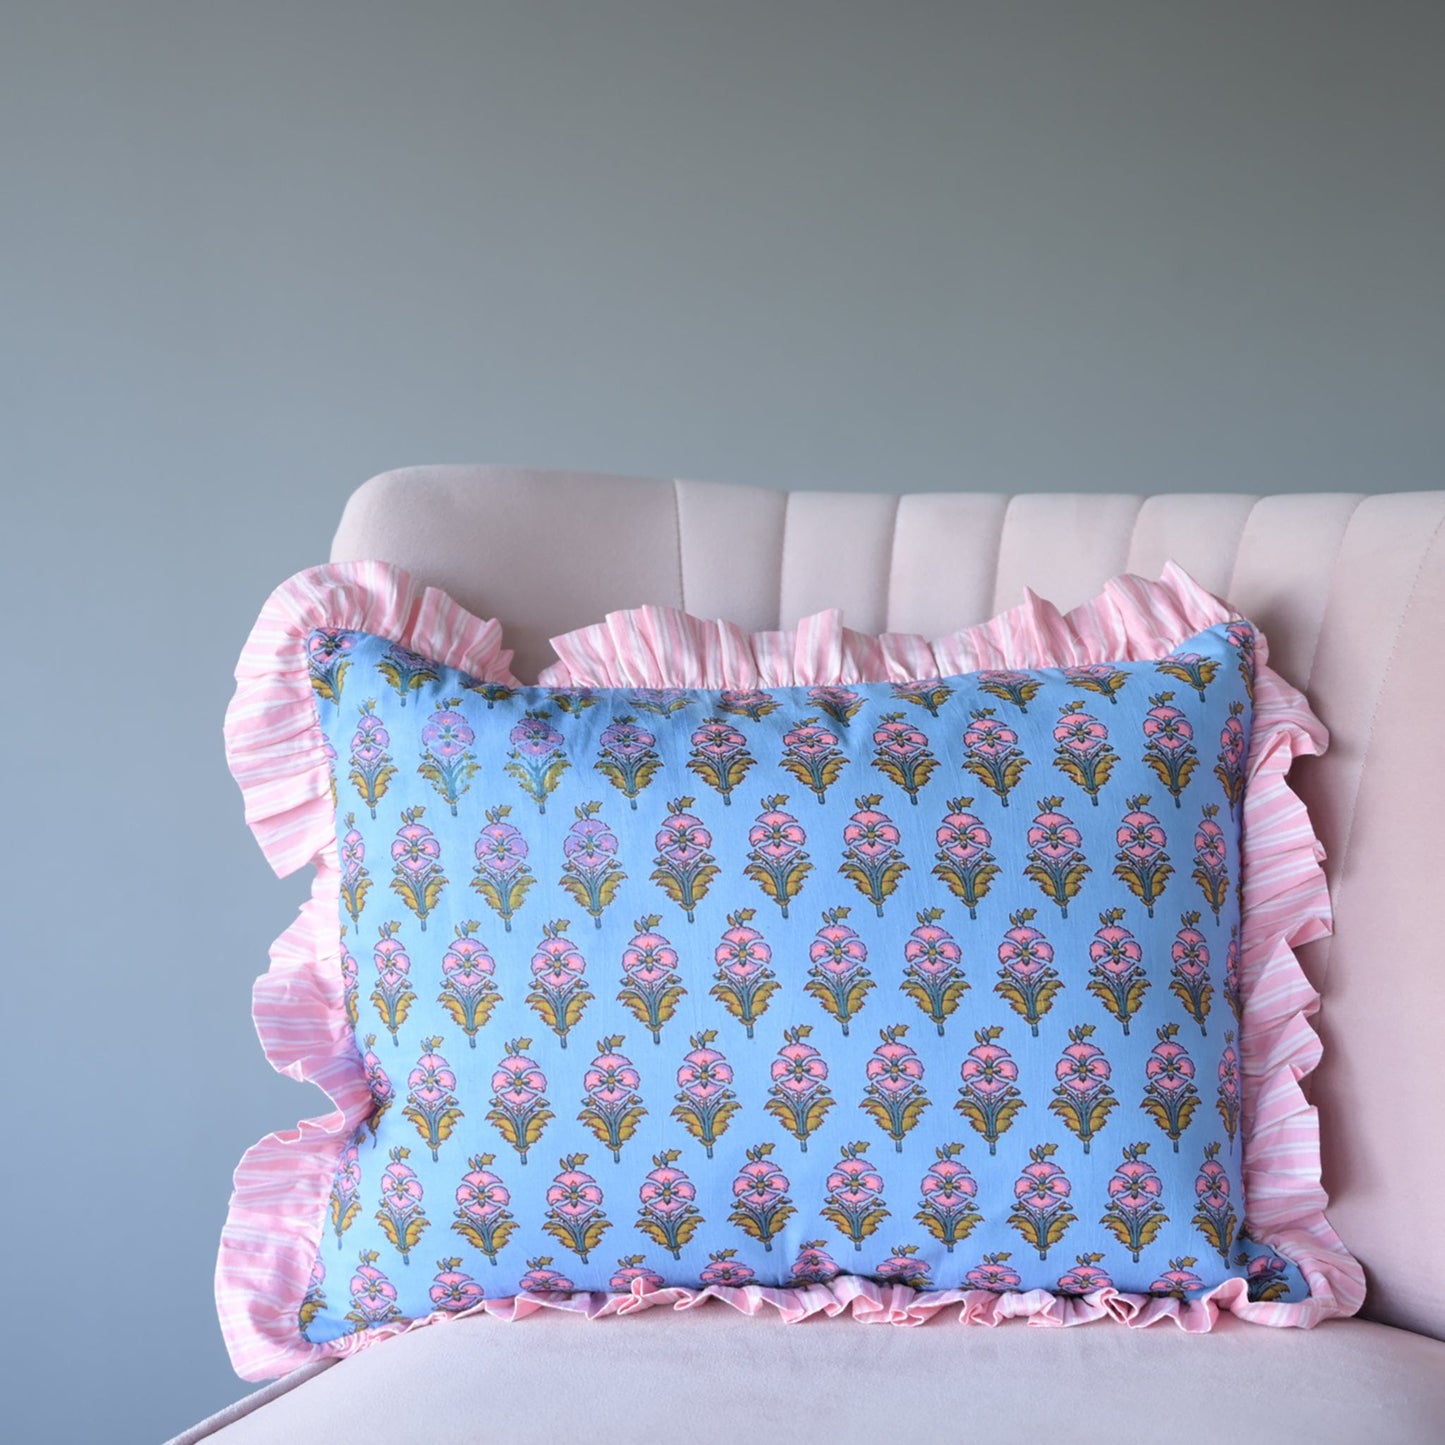 Cushions Small Ruffle Cushion - Small Pink Flowers on Blue 19130